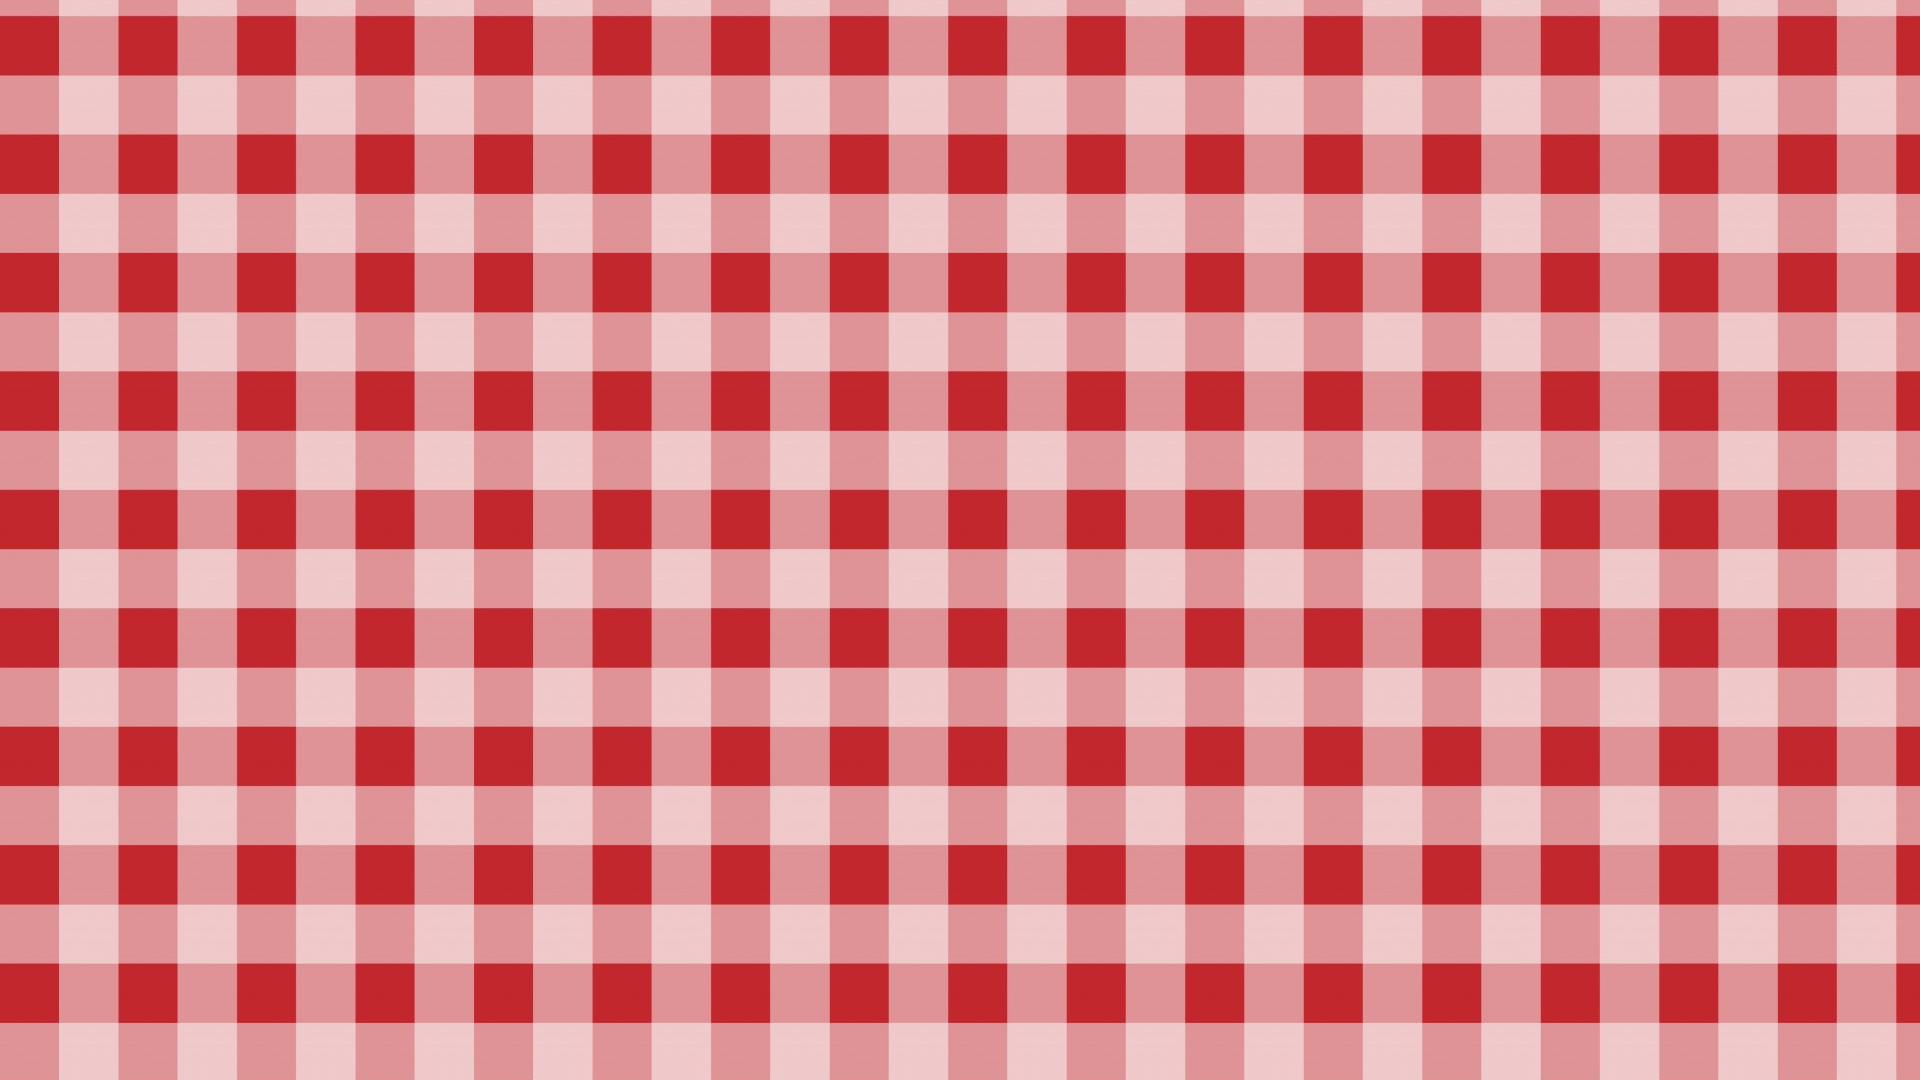 Free download checks, Gingham background, Public domain, Other subject, 1920x1080 Full HD Desktop